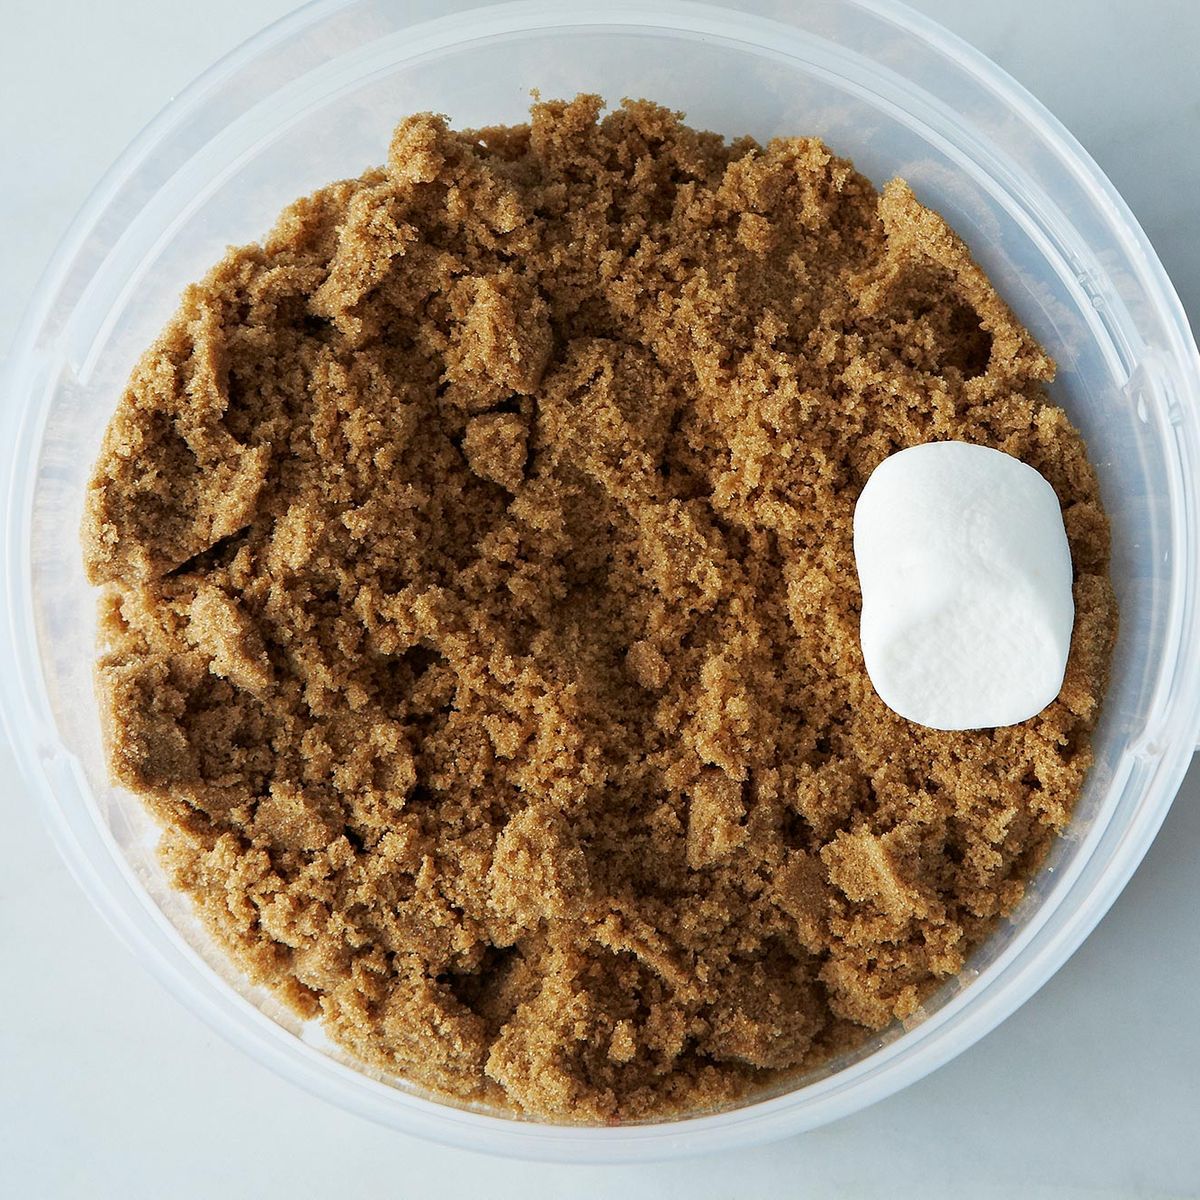 How to Measure Packed Brown Sugar How Does Cup of Sugar Weigh?